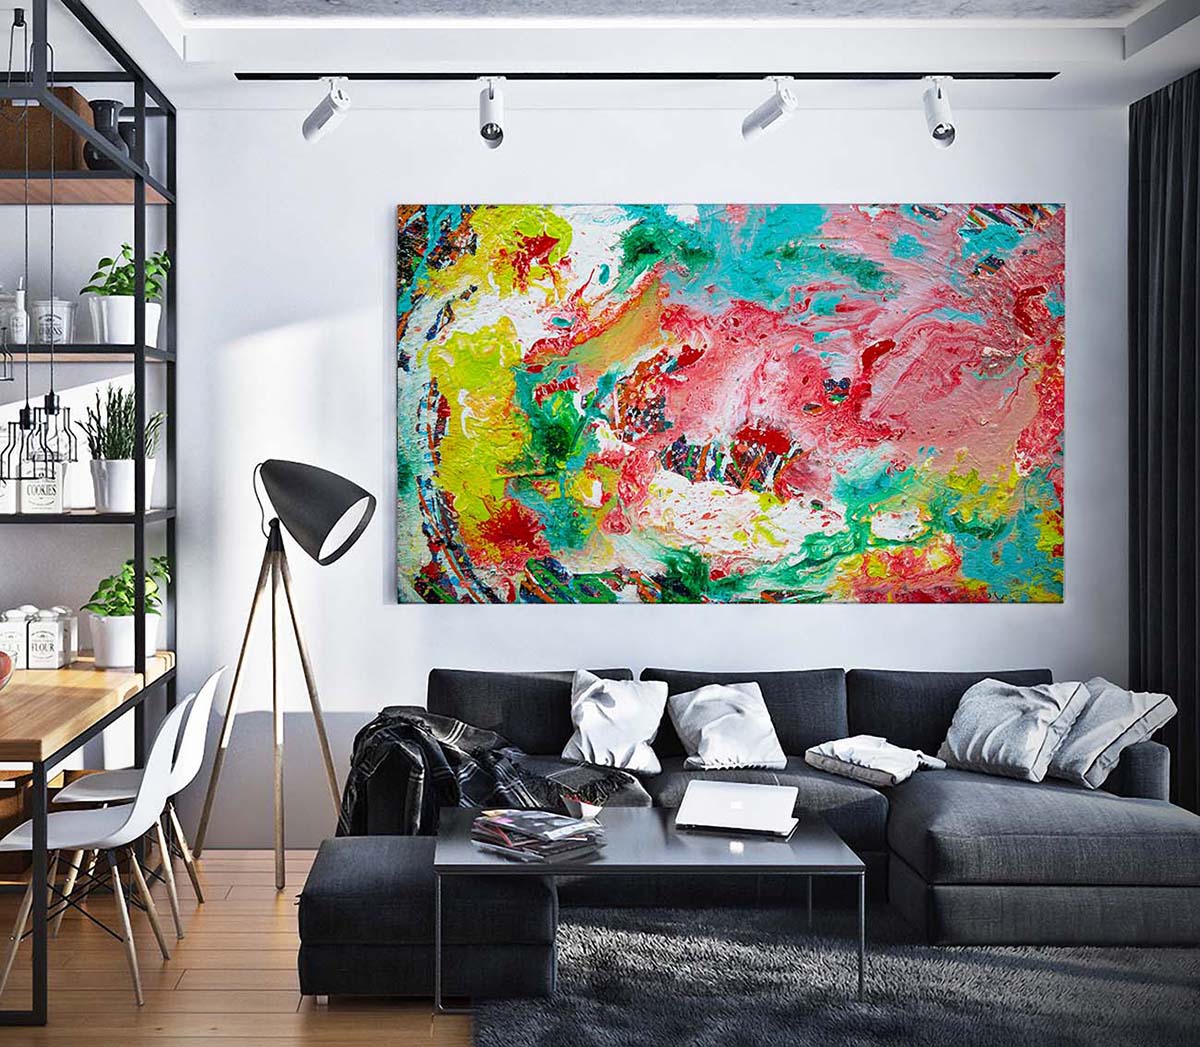 Abstract 21 Summerfeld artwork by Doug LaRue large print on a living room wall